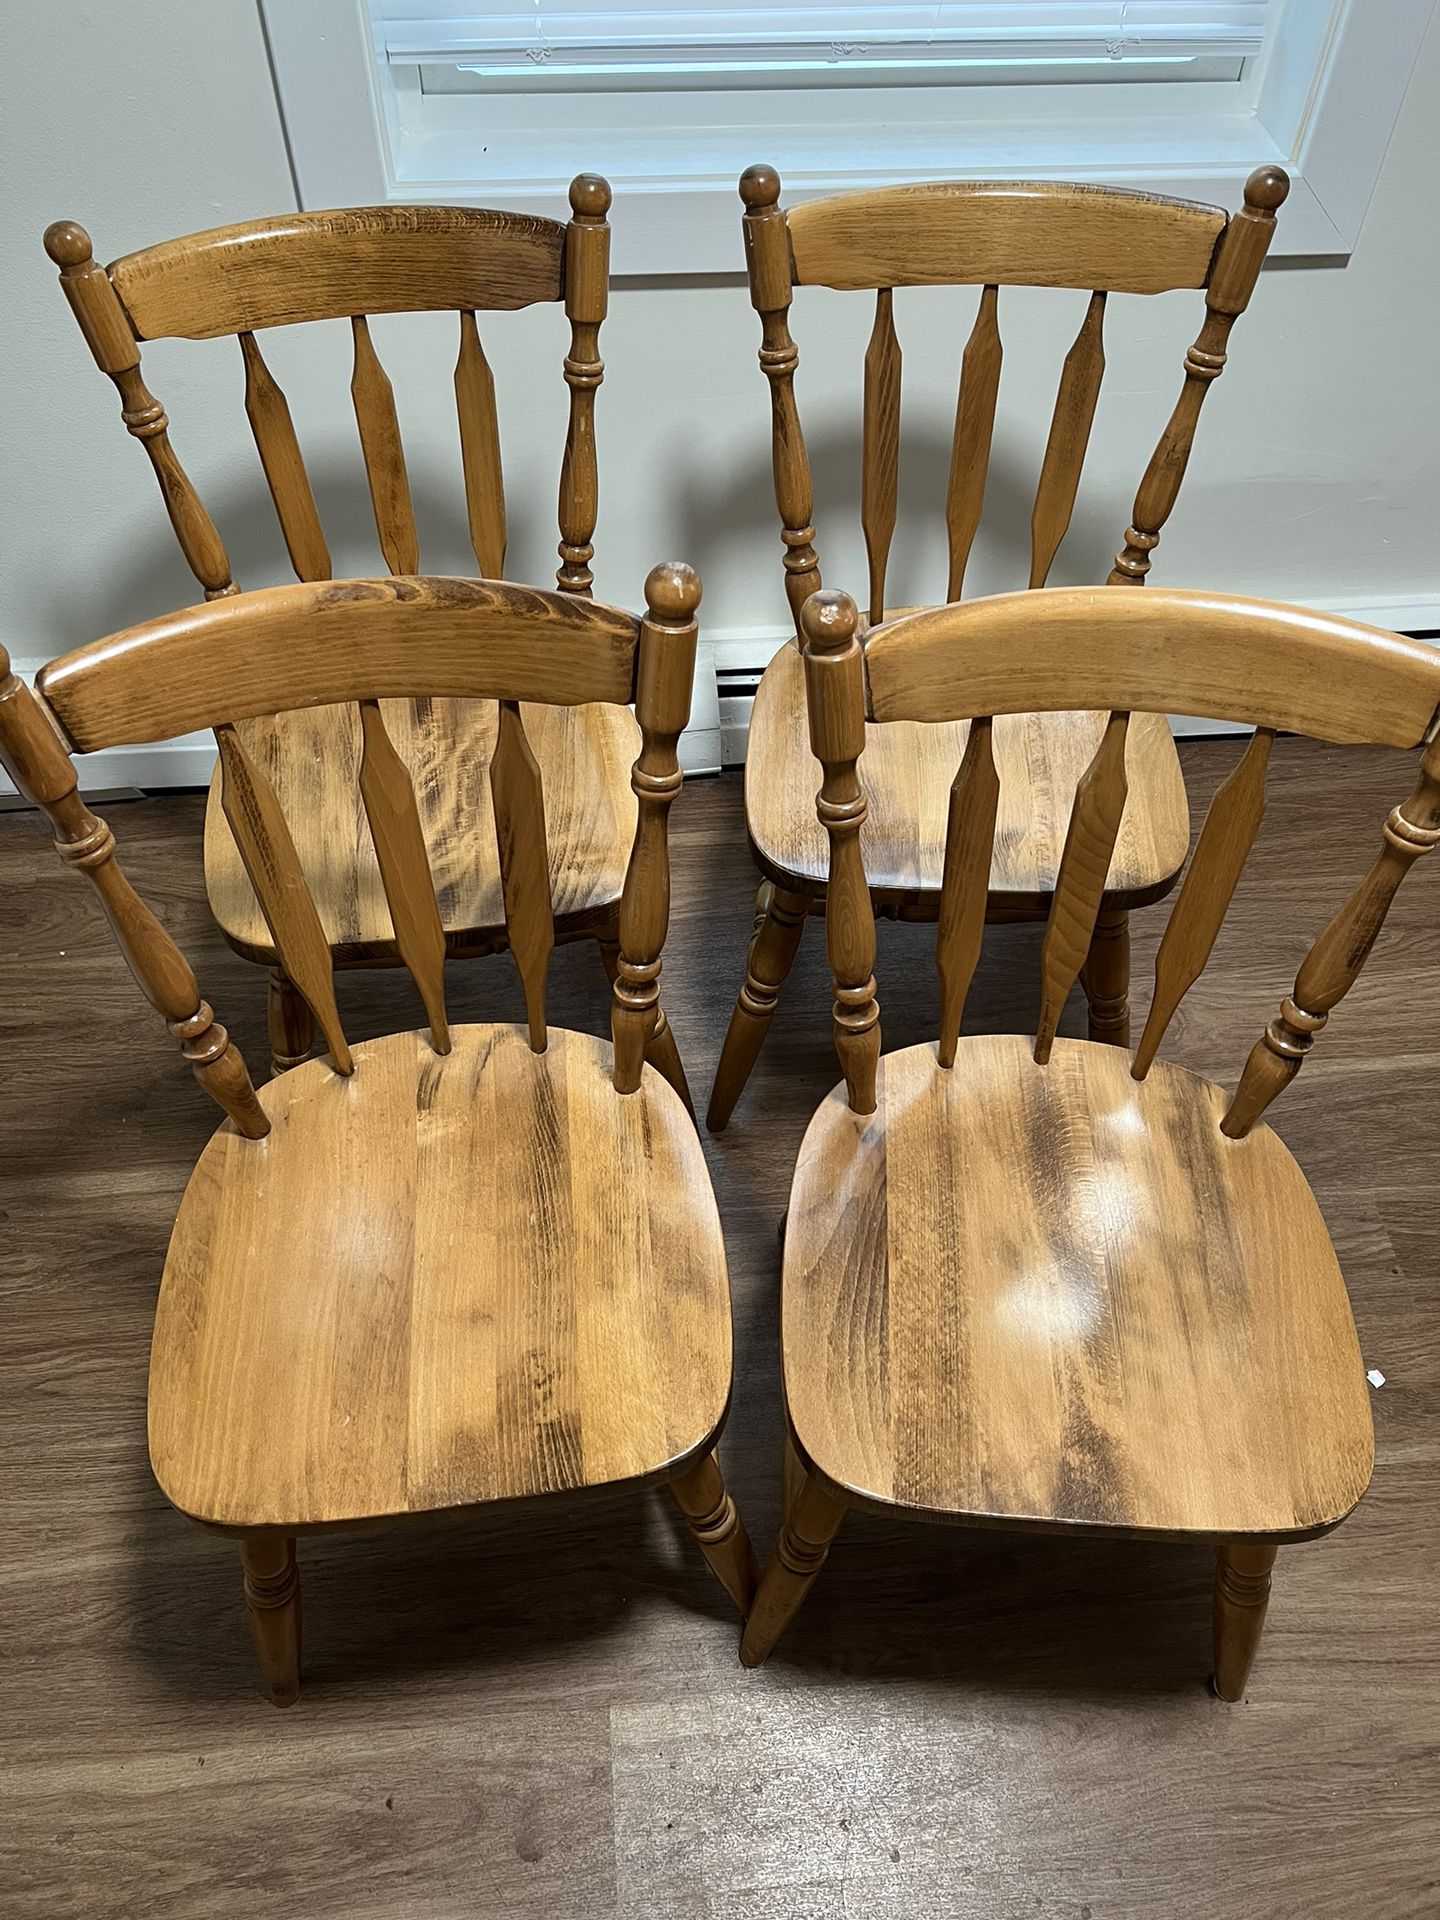 Four Wooden Chairs 